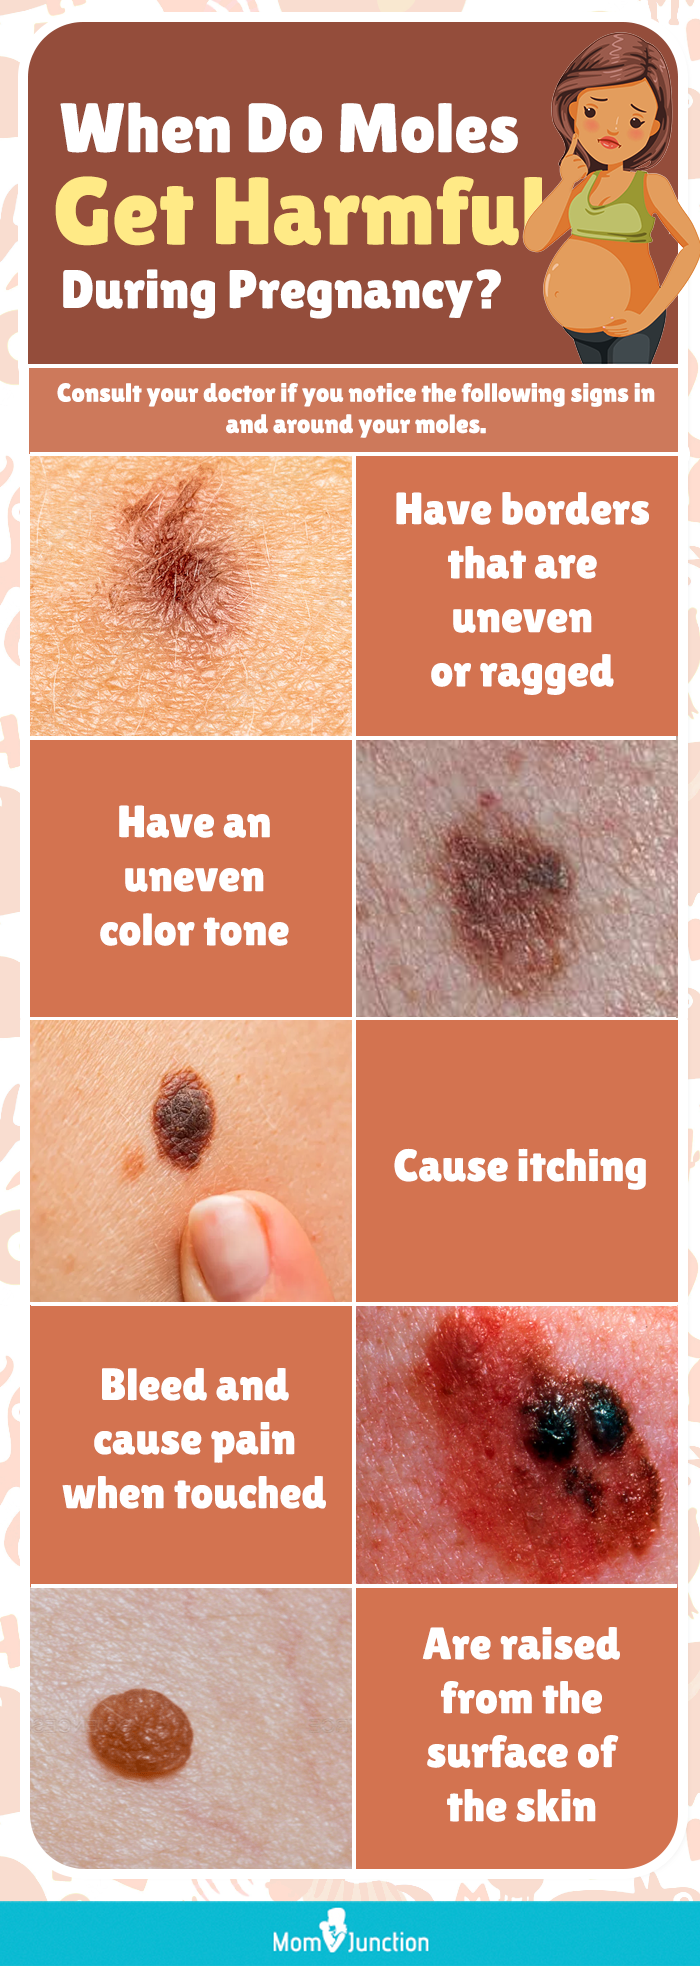 when do moles get harmful (infographic)